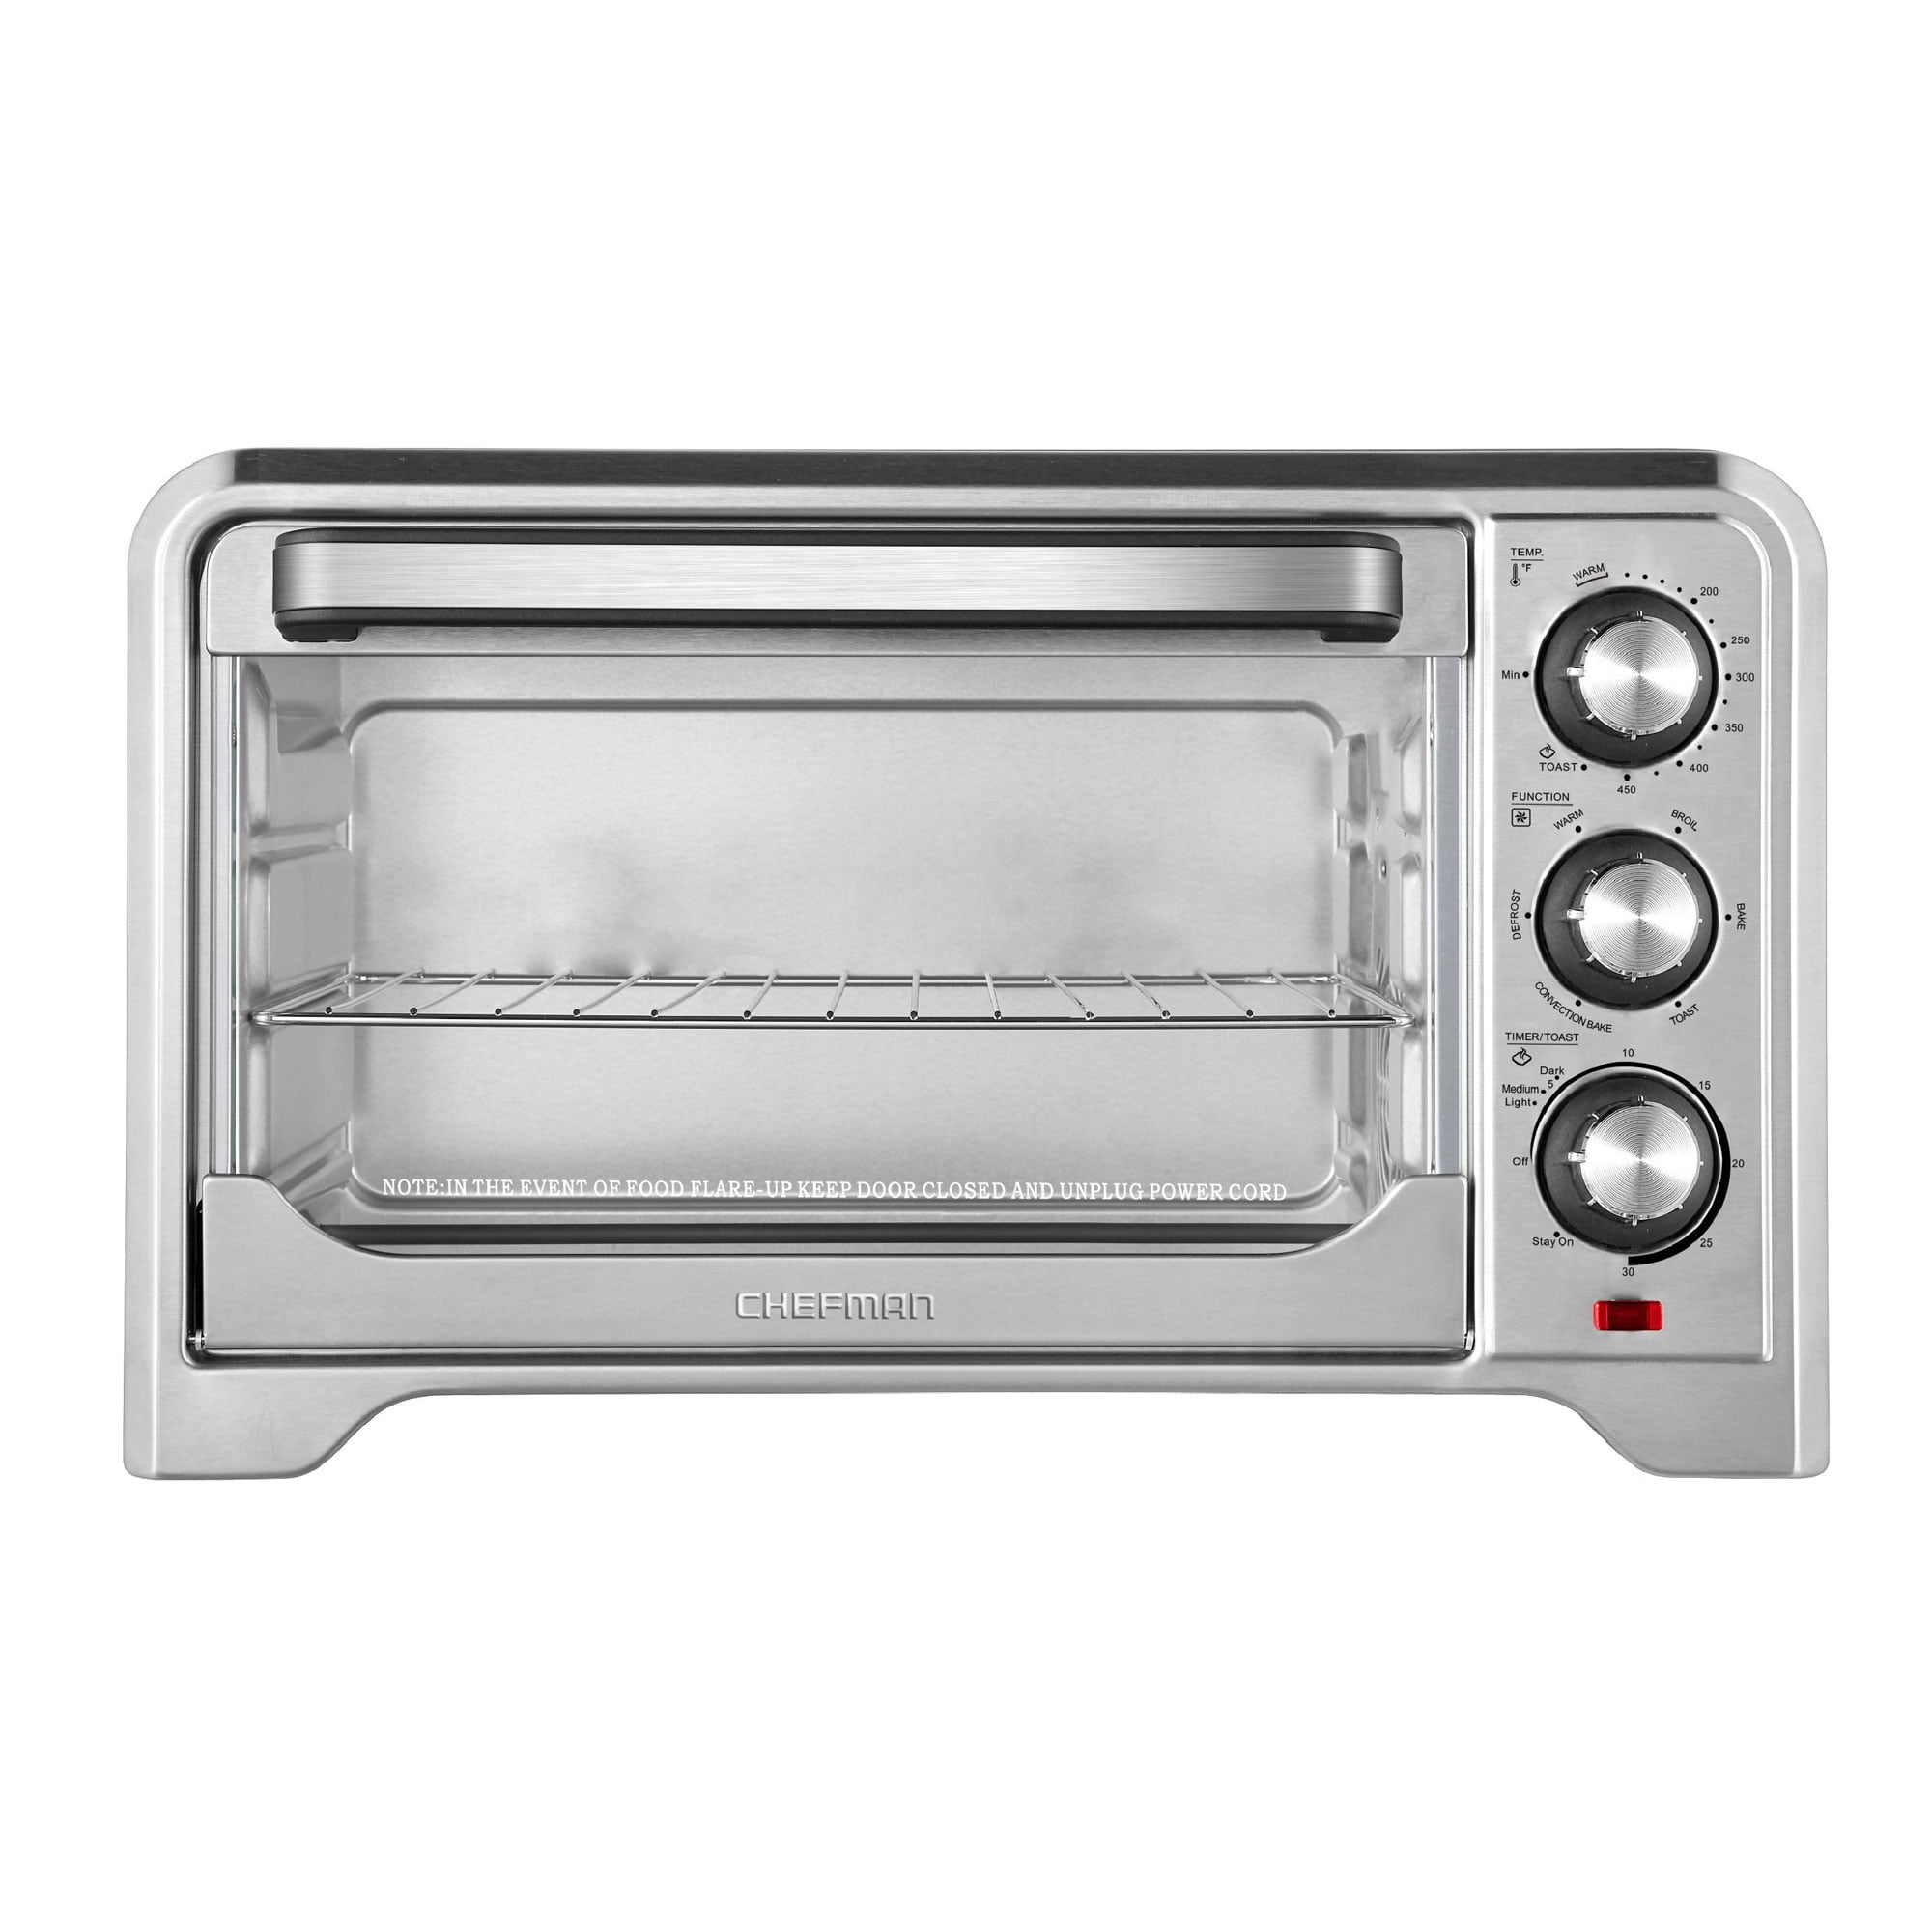 Toaster Convection Oven Countertop X-Large 6 Function Stainless Steel Chefman 